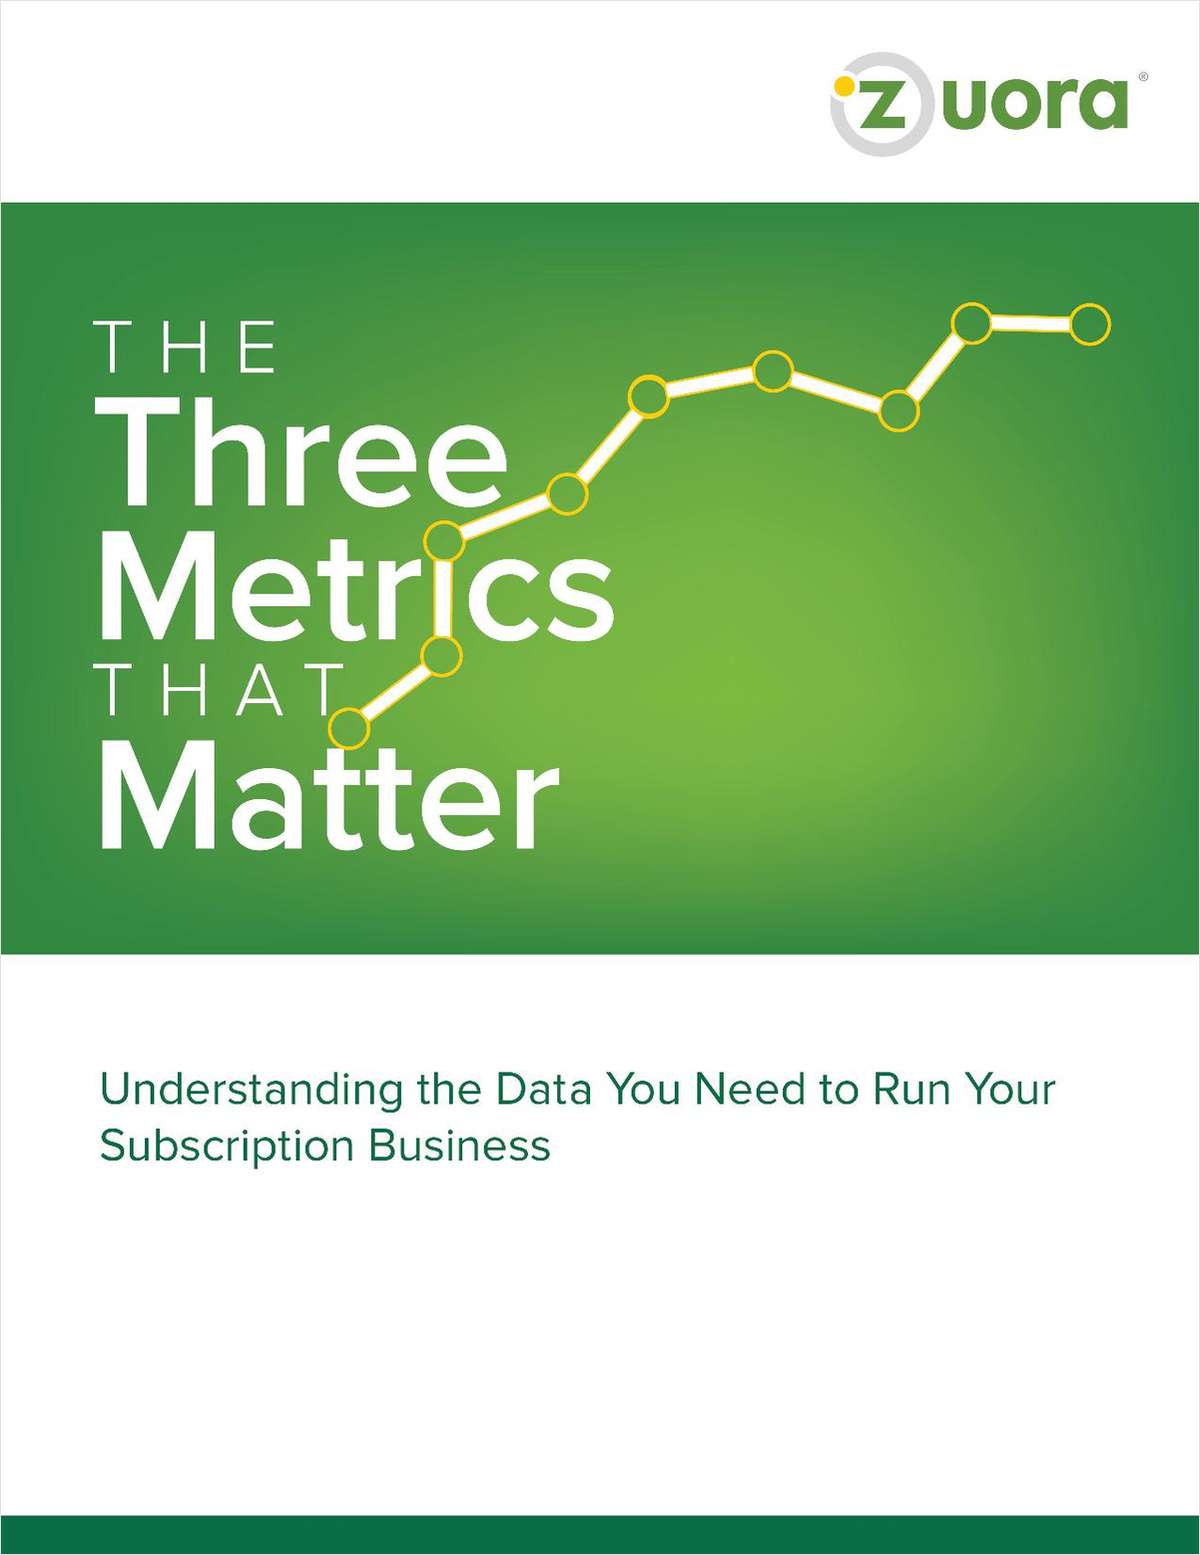 The 3 Metrics That Matter: Understanding the Data You Need to Run Your Subscription Business